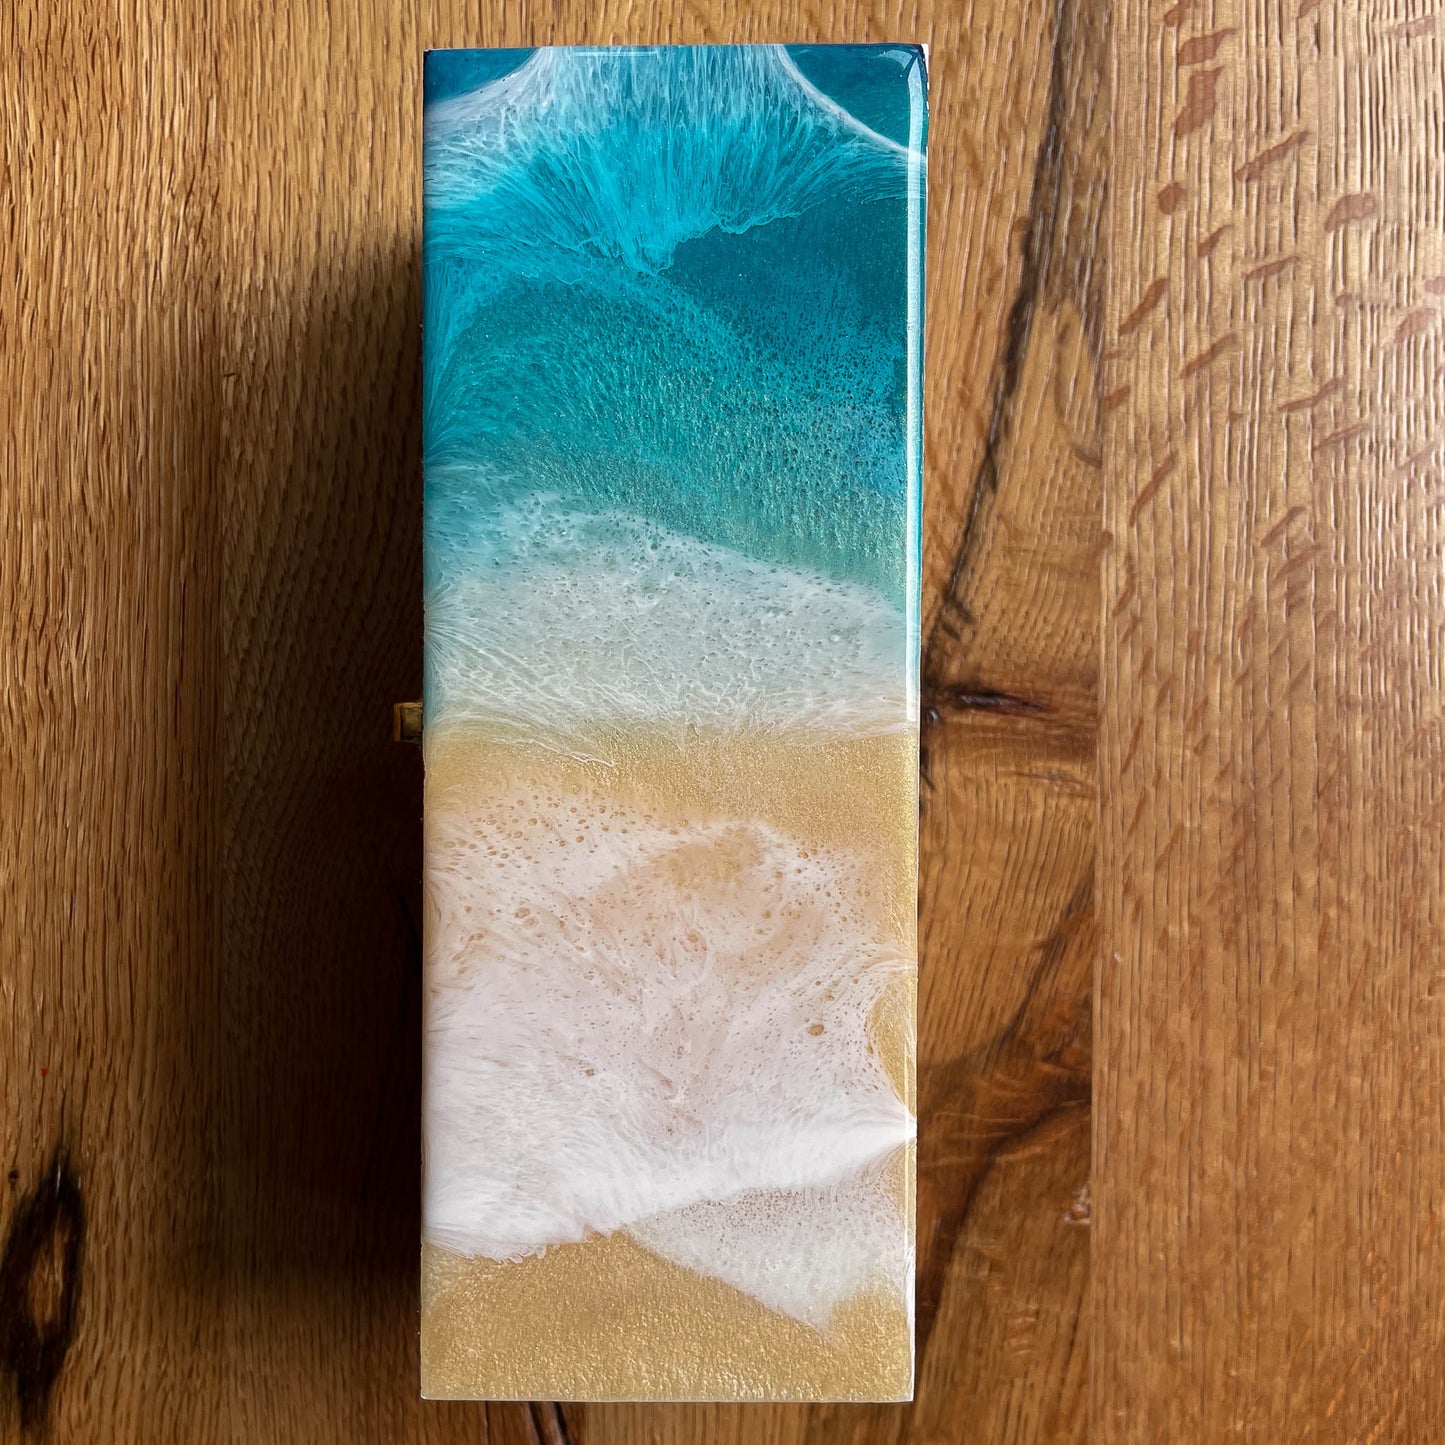 Ocean-themed tea box with epoxy resin-coated lid